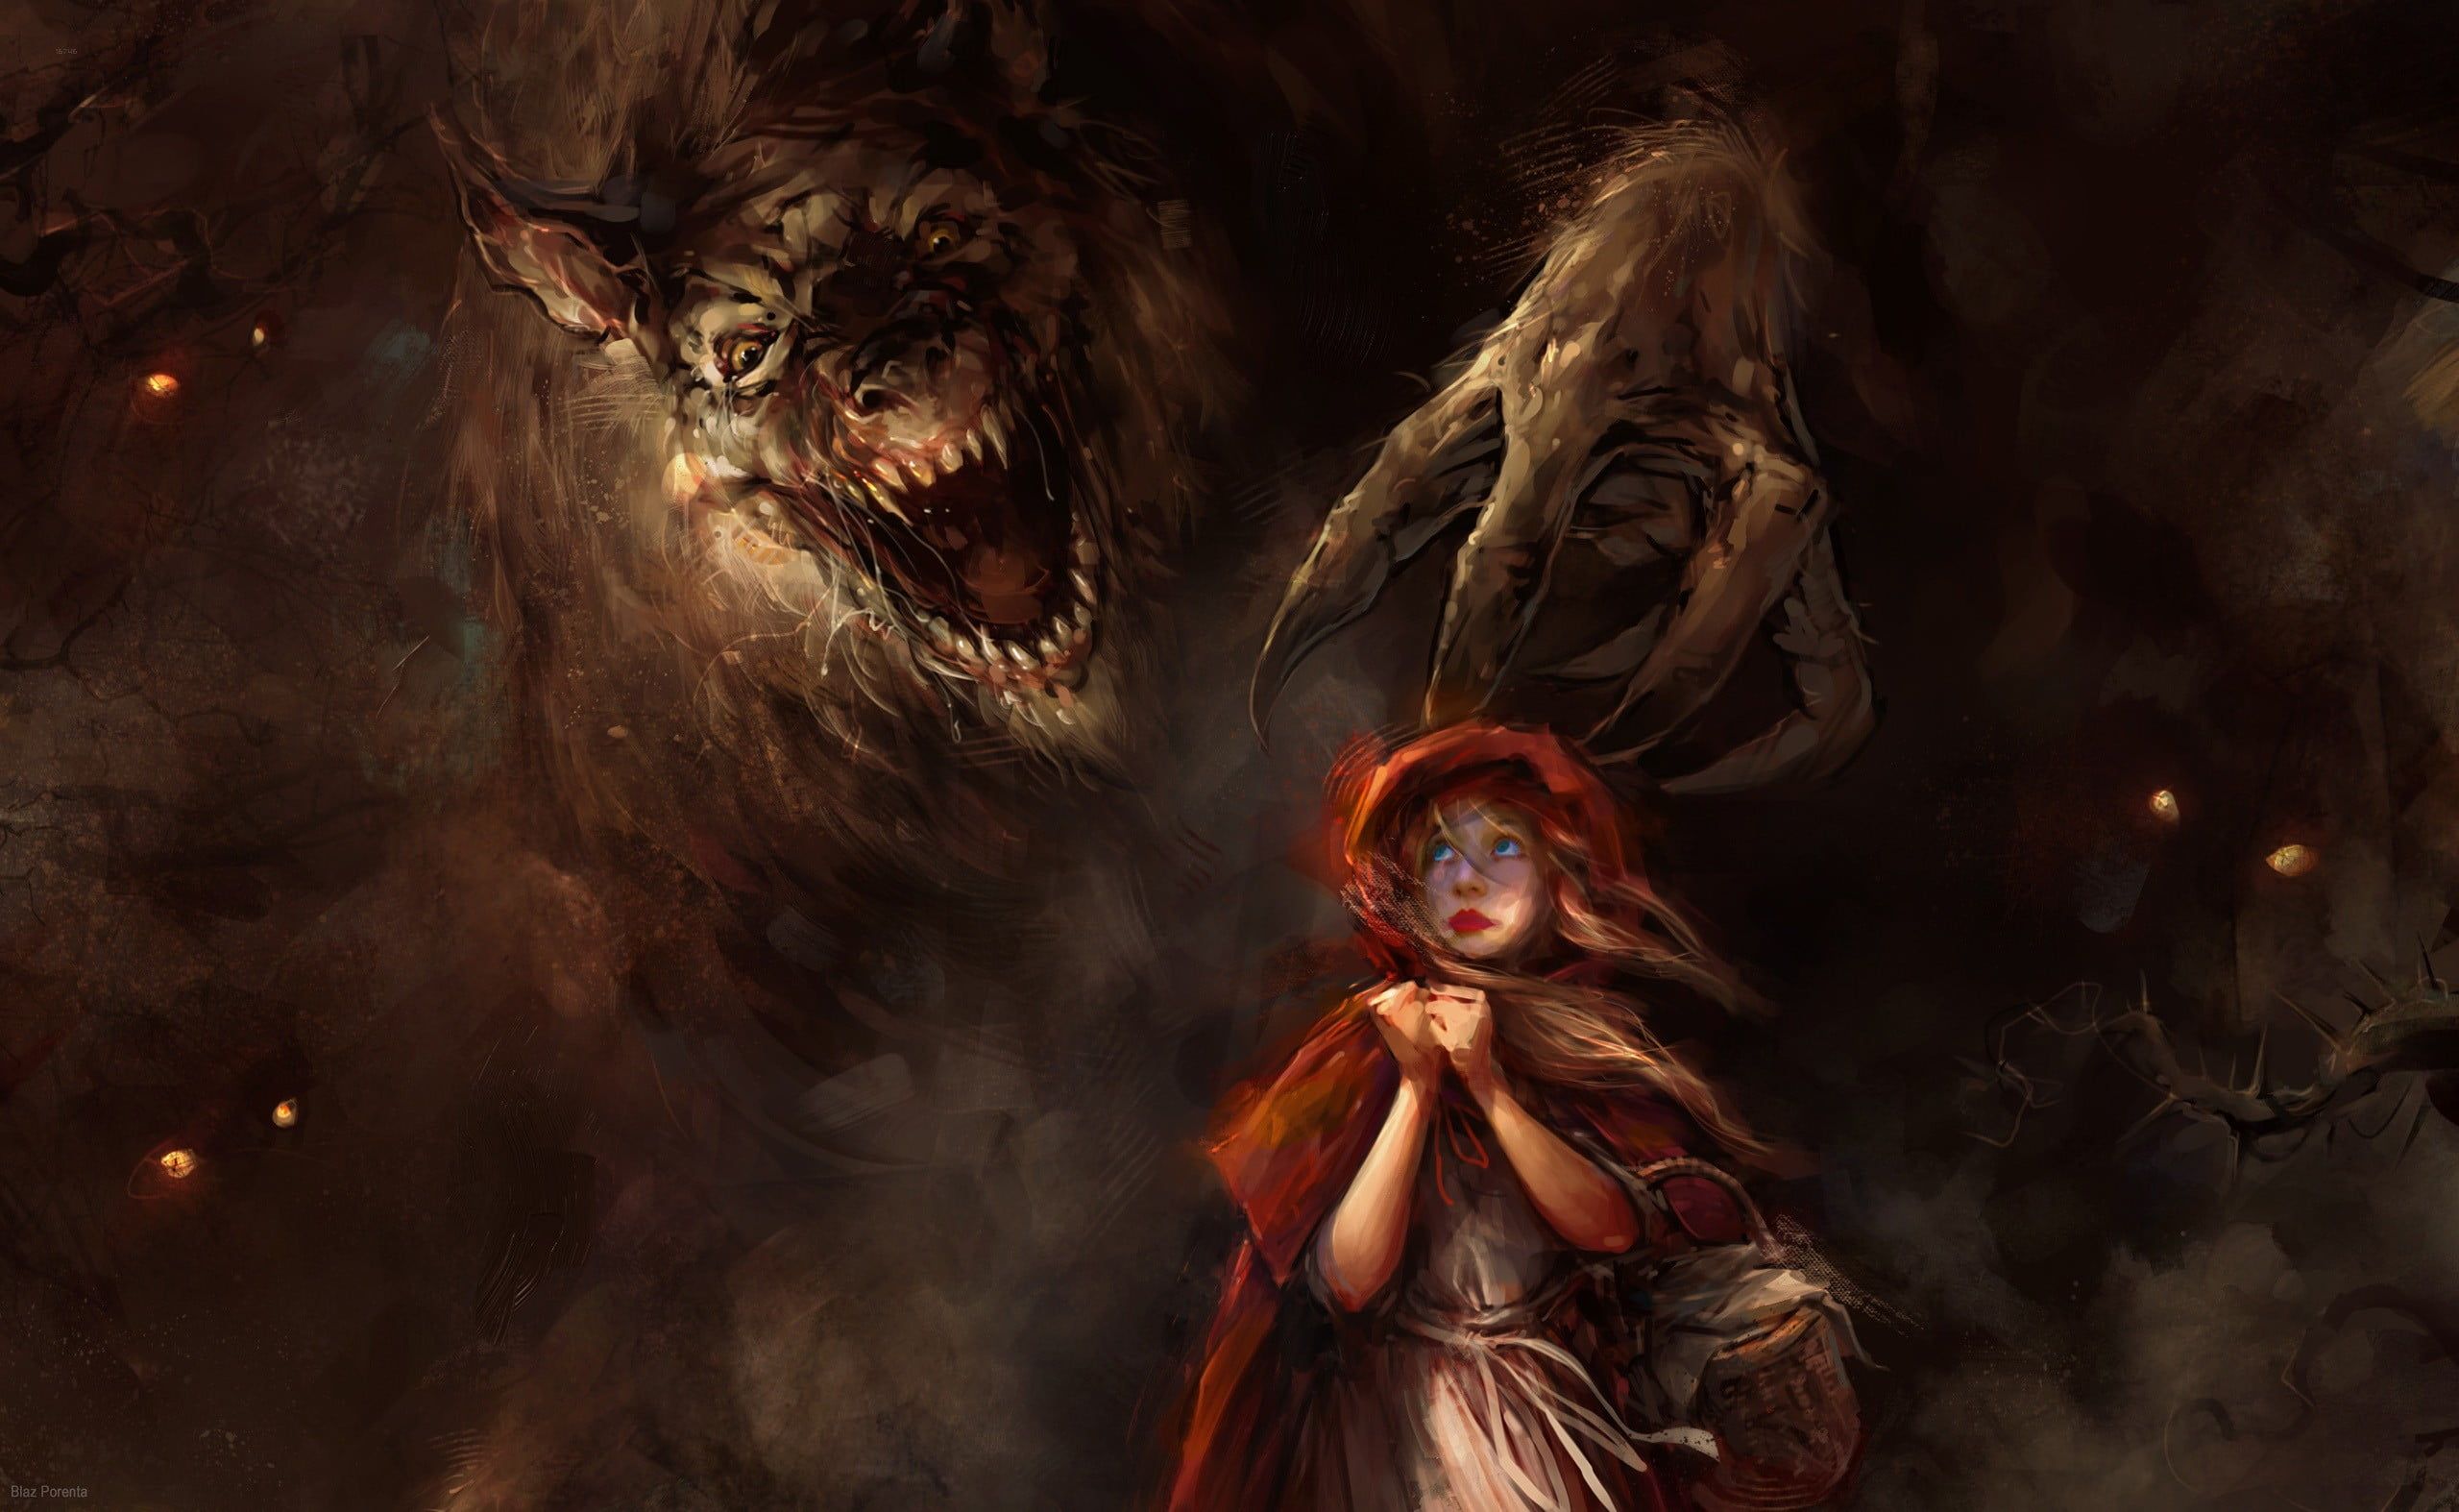 Little Red Riding Hood painting, werewolves, Little Red Riding